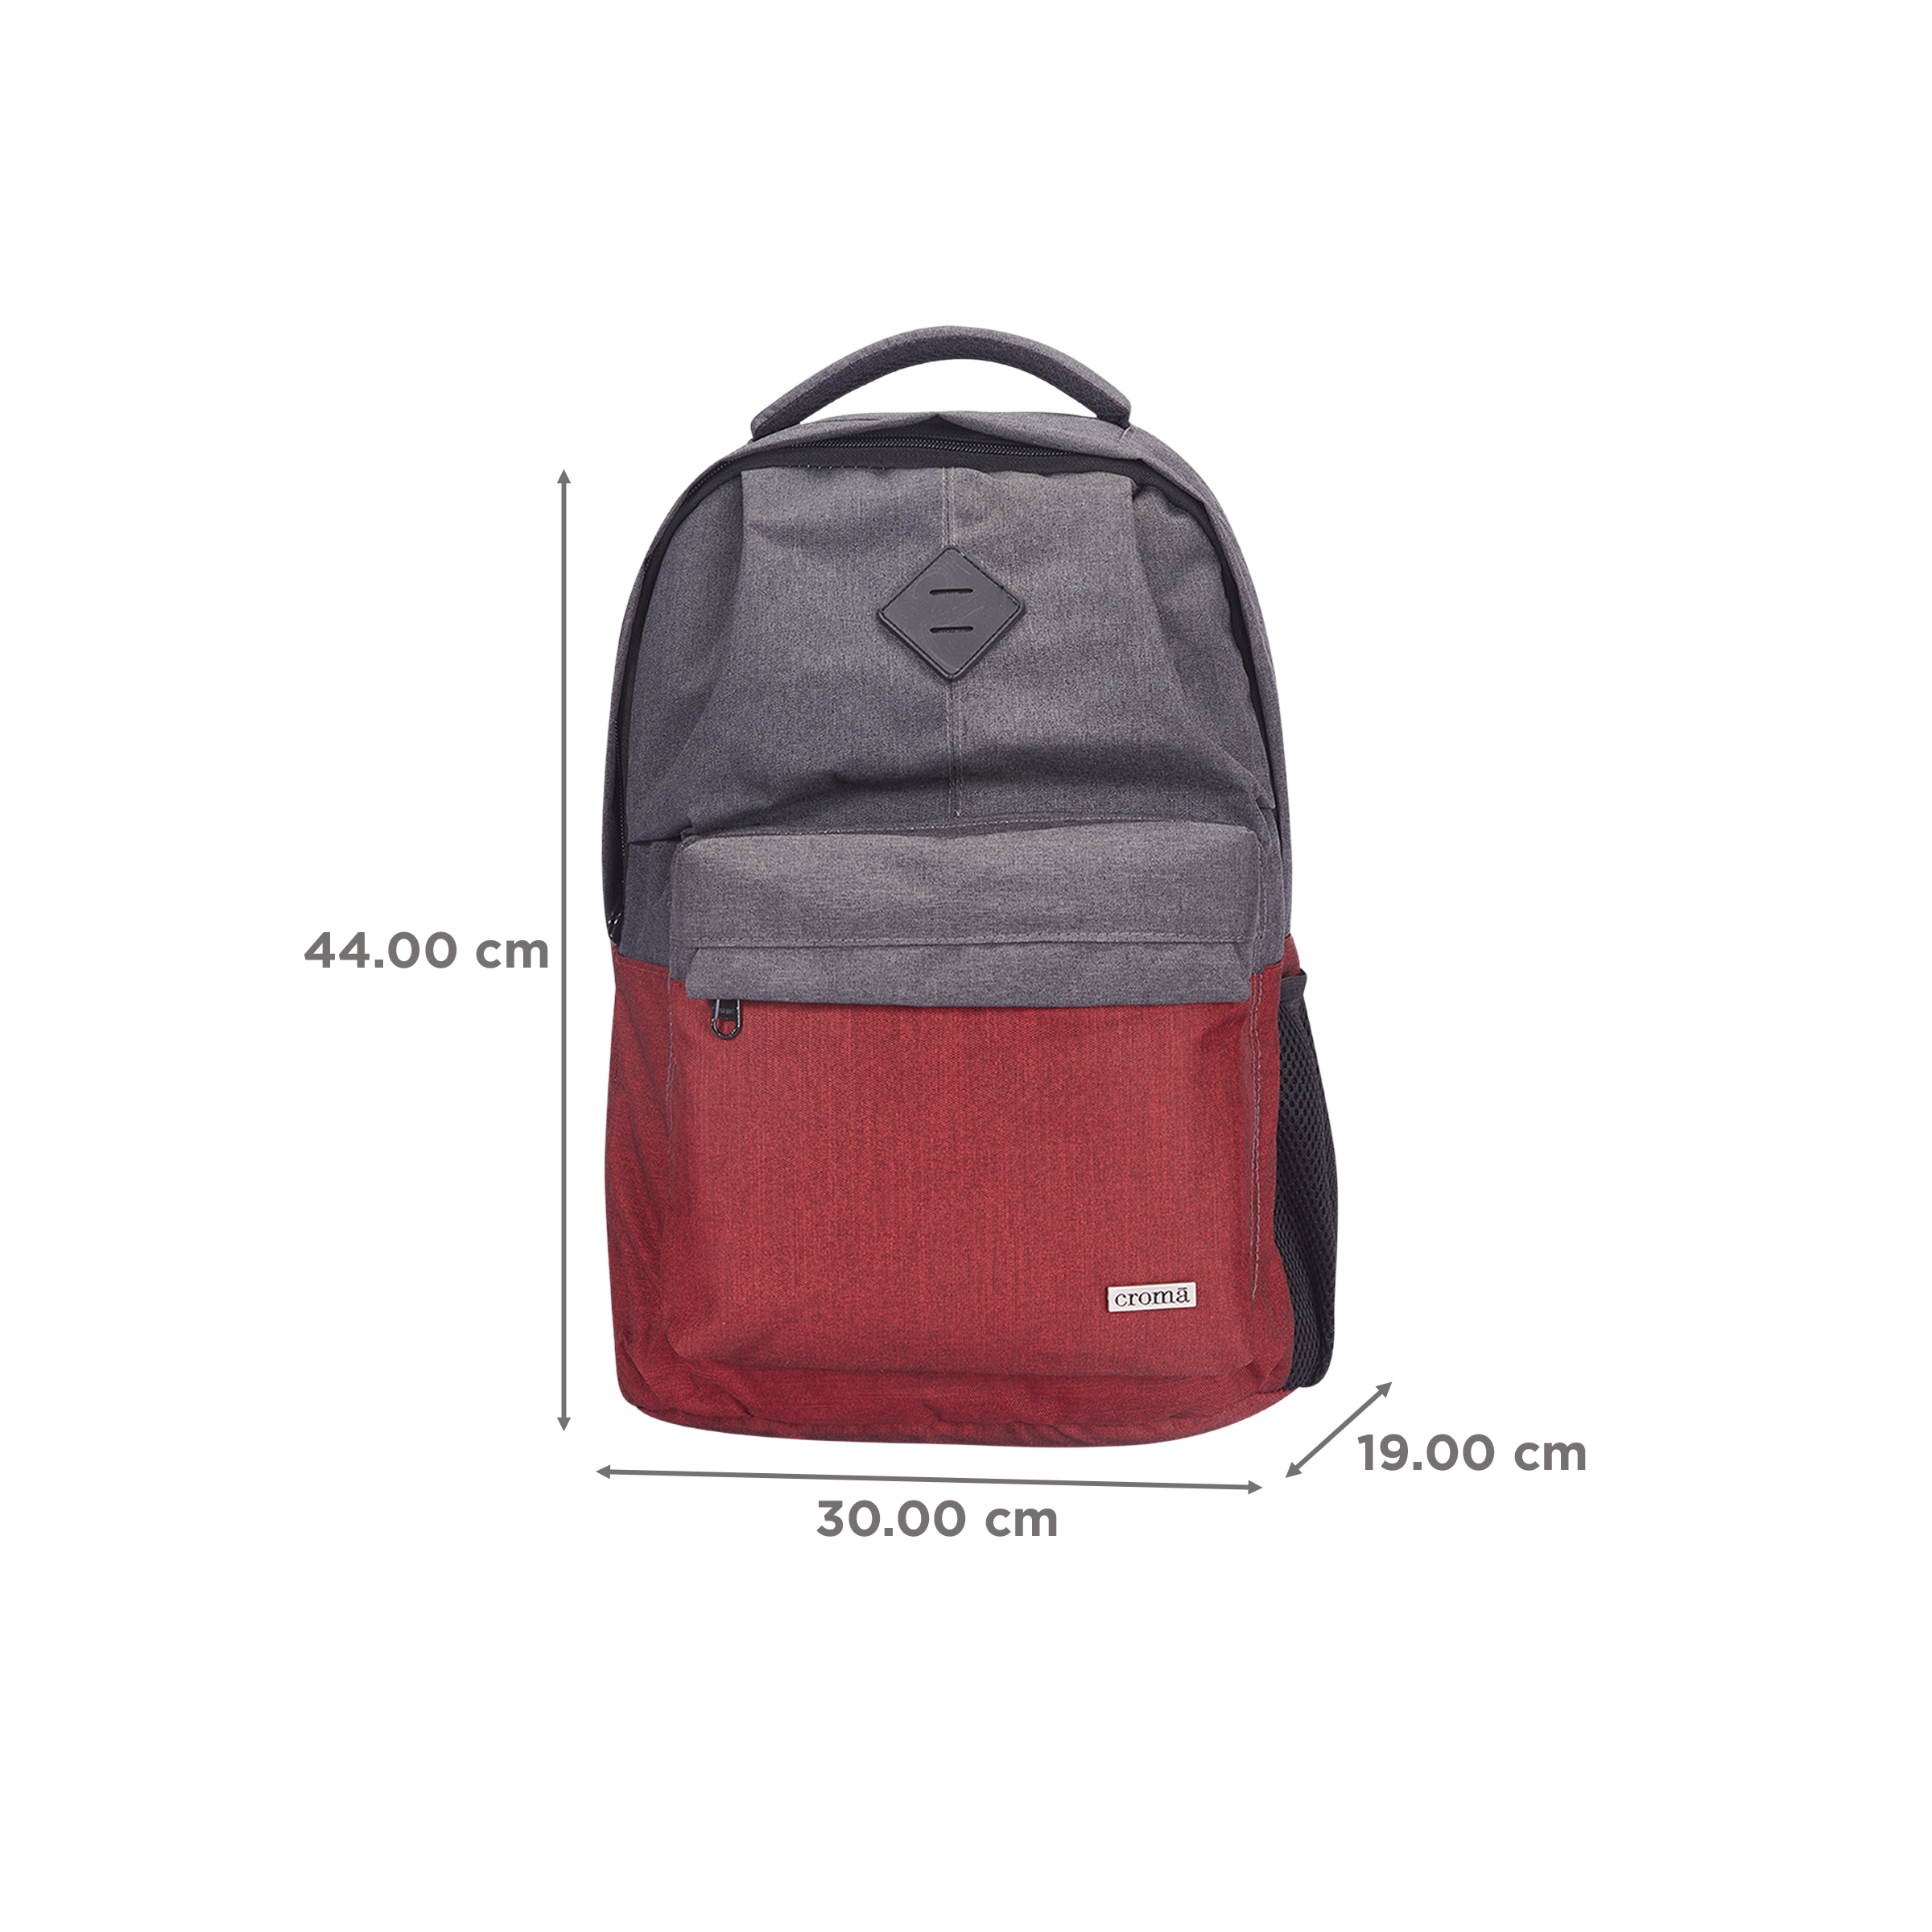 Syed Faheem on LinkedIn: Wildcraft laptop bags are now available in Croma!!!